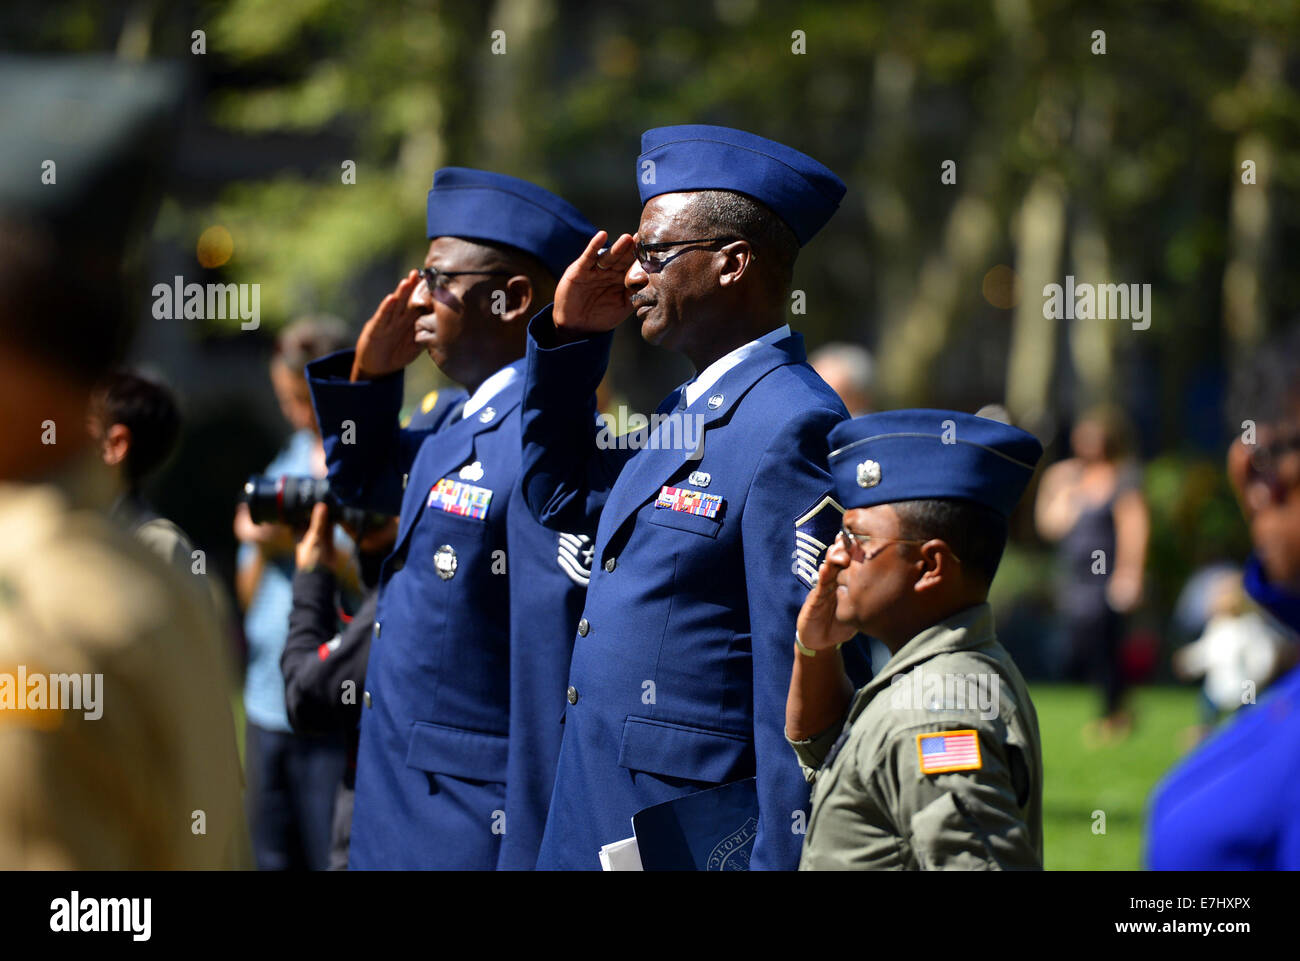 New York, Unite States, USA. 18th Sep, 2014. Military officials of the United States Air Force (USAF) salute at a commemoration of the 67th birthday of USAF in New York, the Unite States, Sept. 18, 2014. Credit:  Wang Lei/Xinhua/Alamy Live News Stock Photo